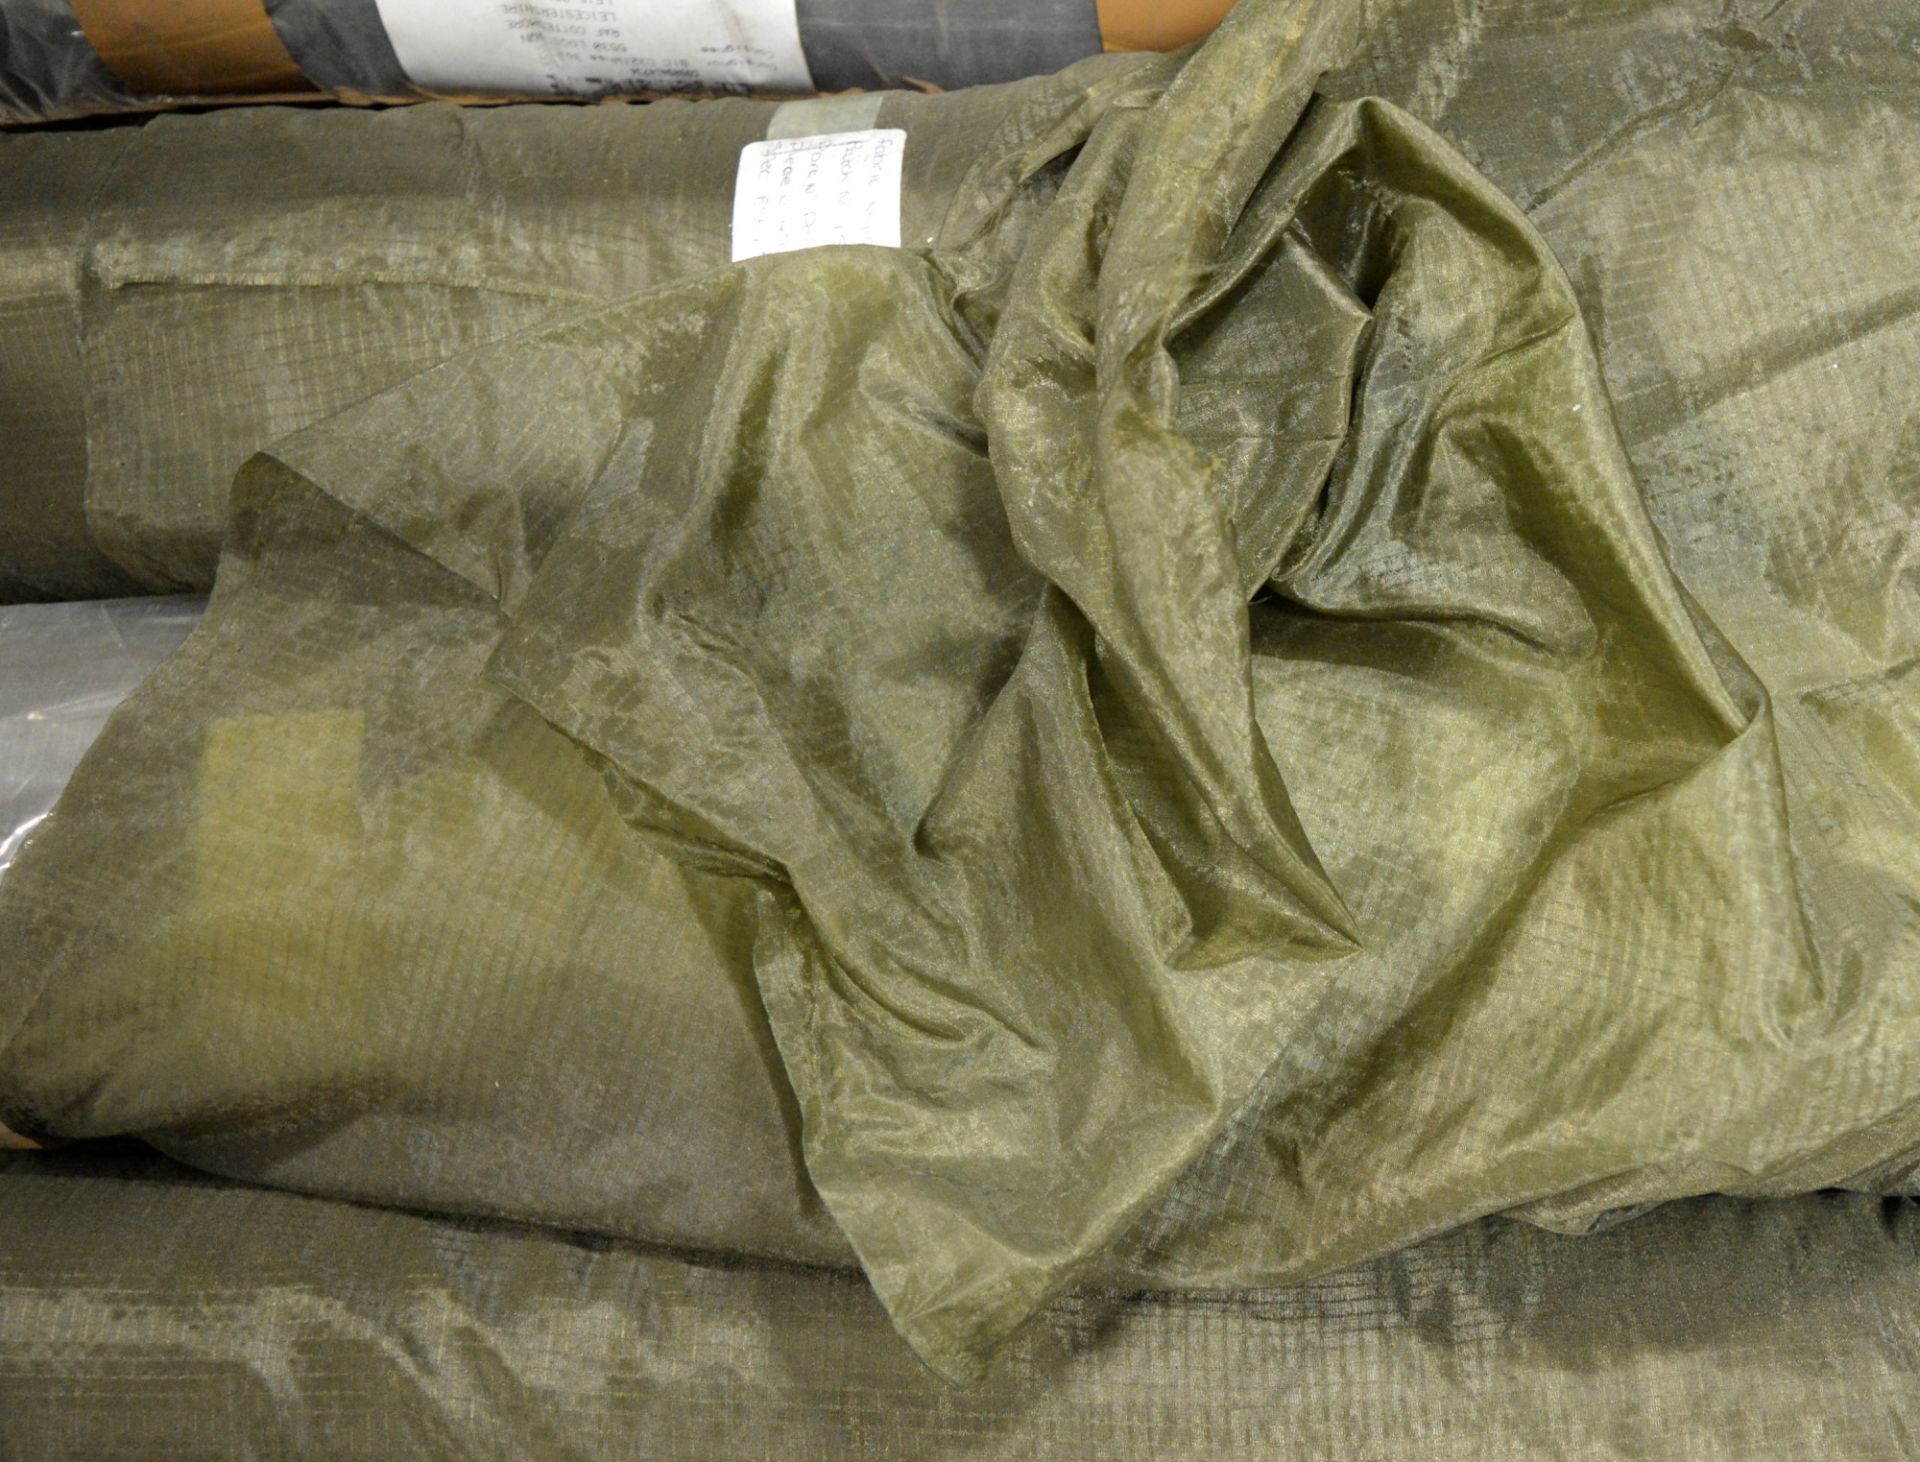 7x Rolls Olive Green Fabric. - Image 3 of 4